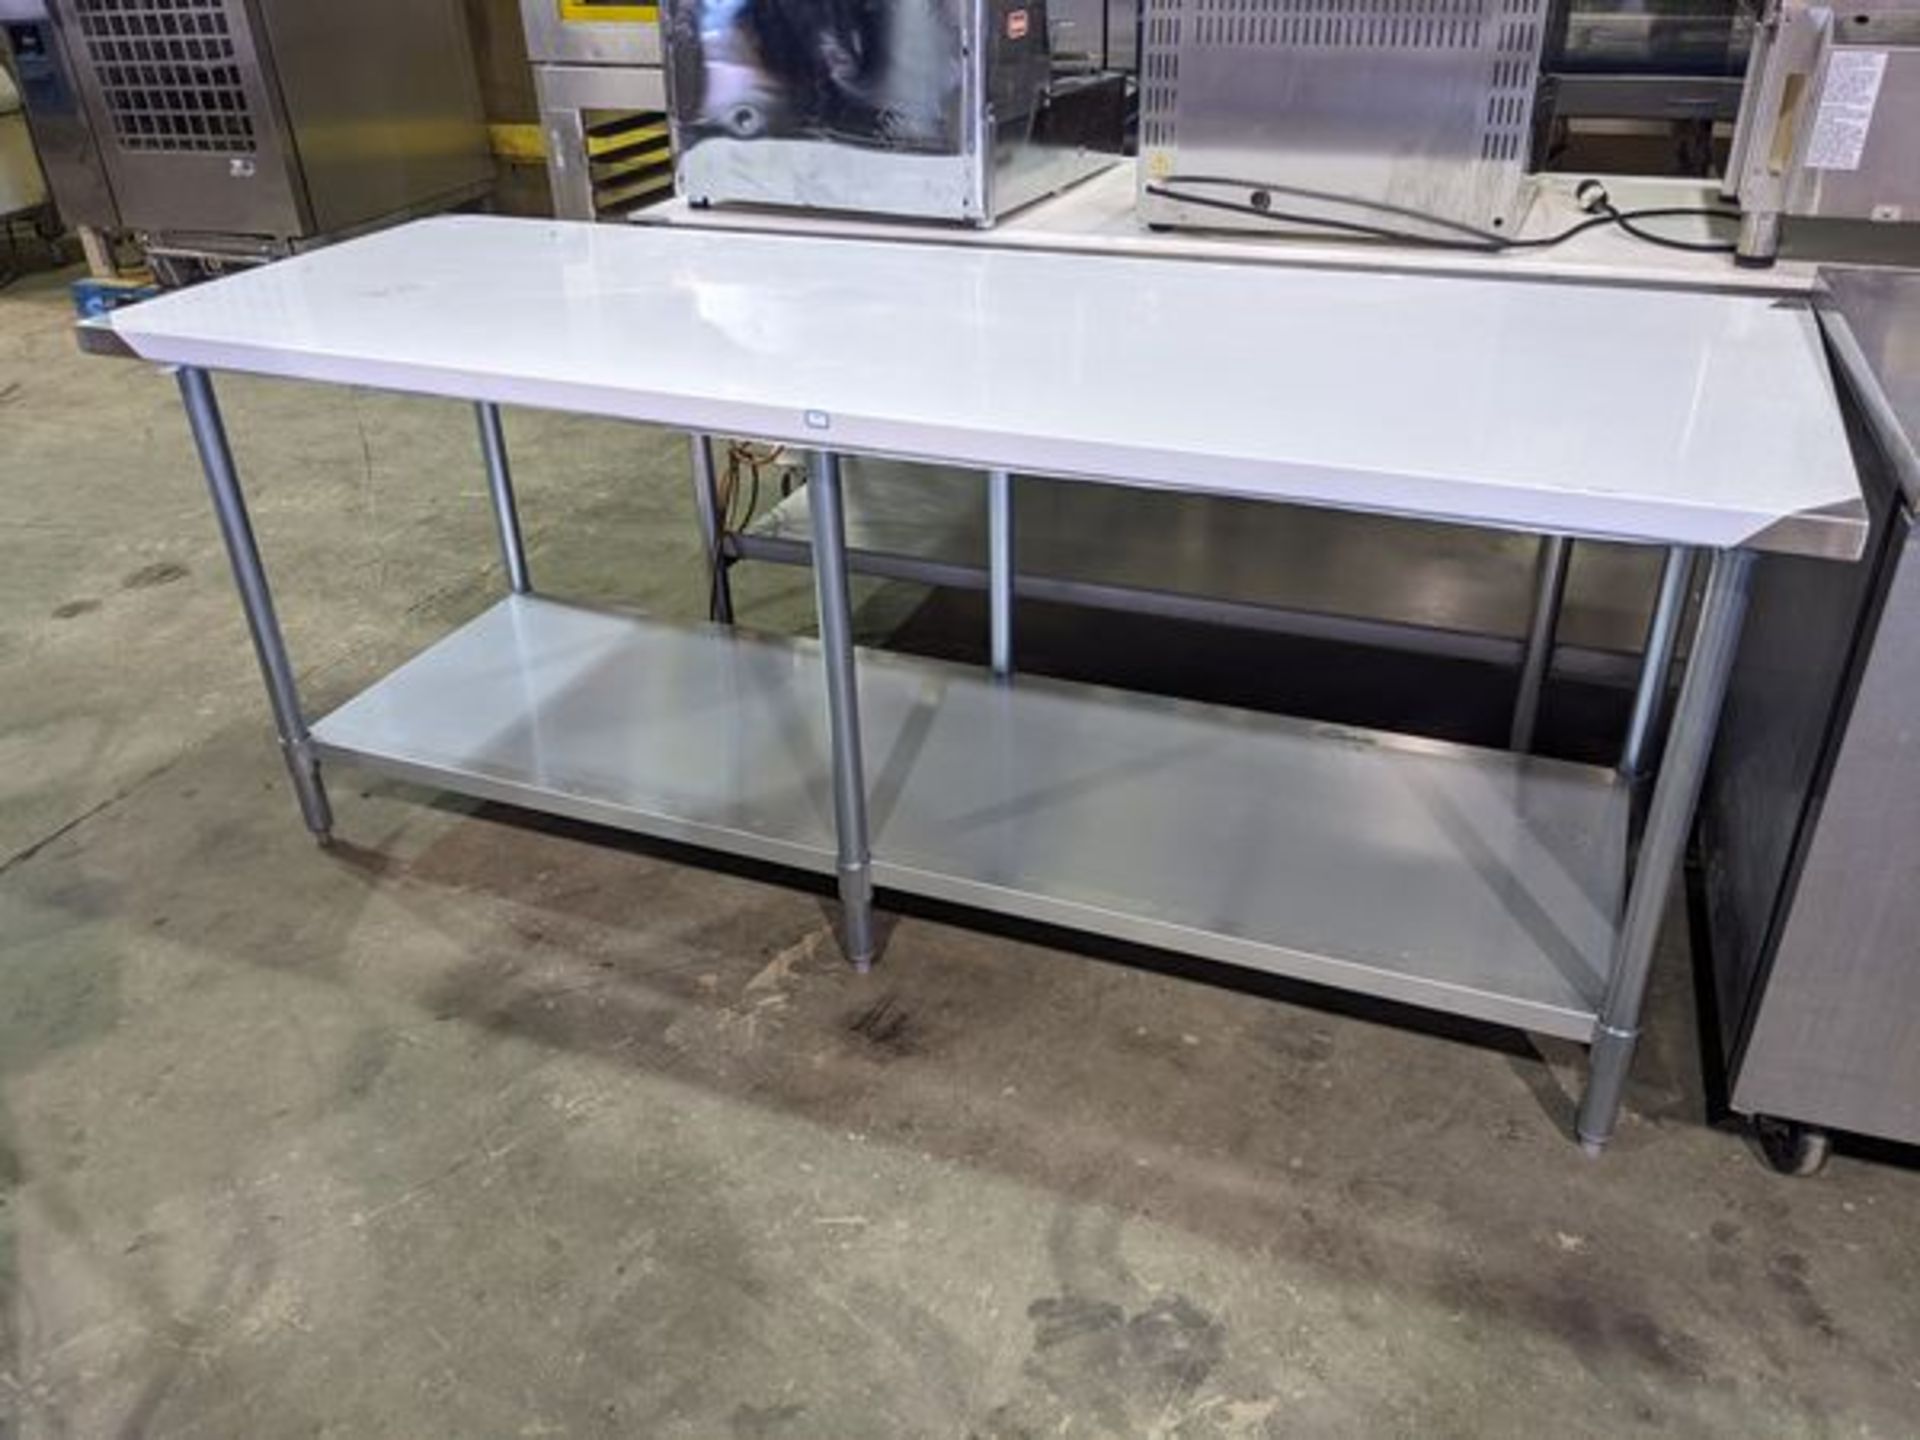 New 30 x 84" Two Tier Stainless Steel Table